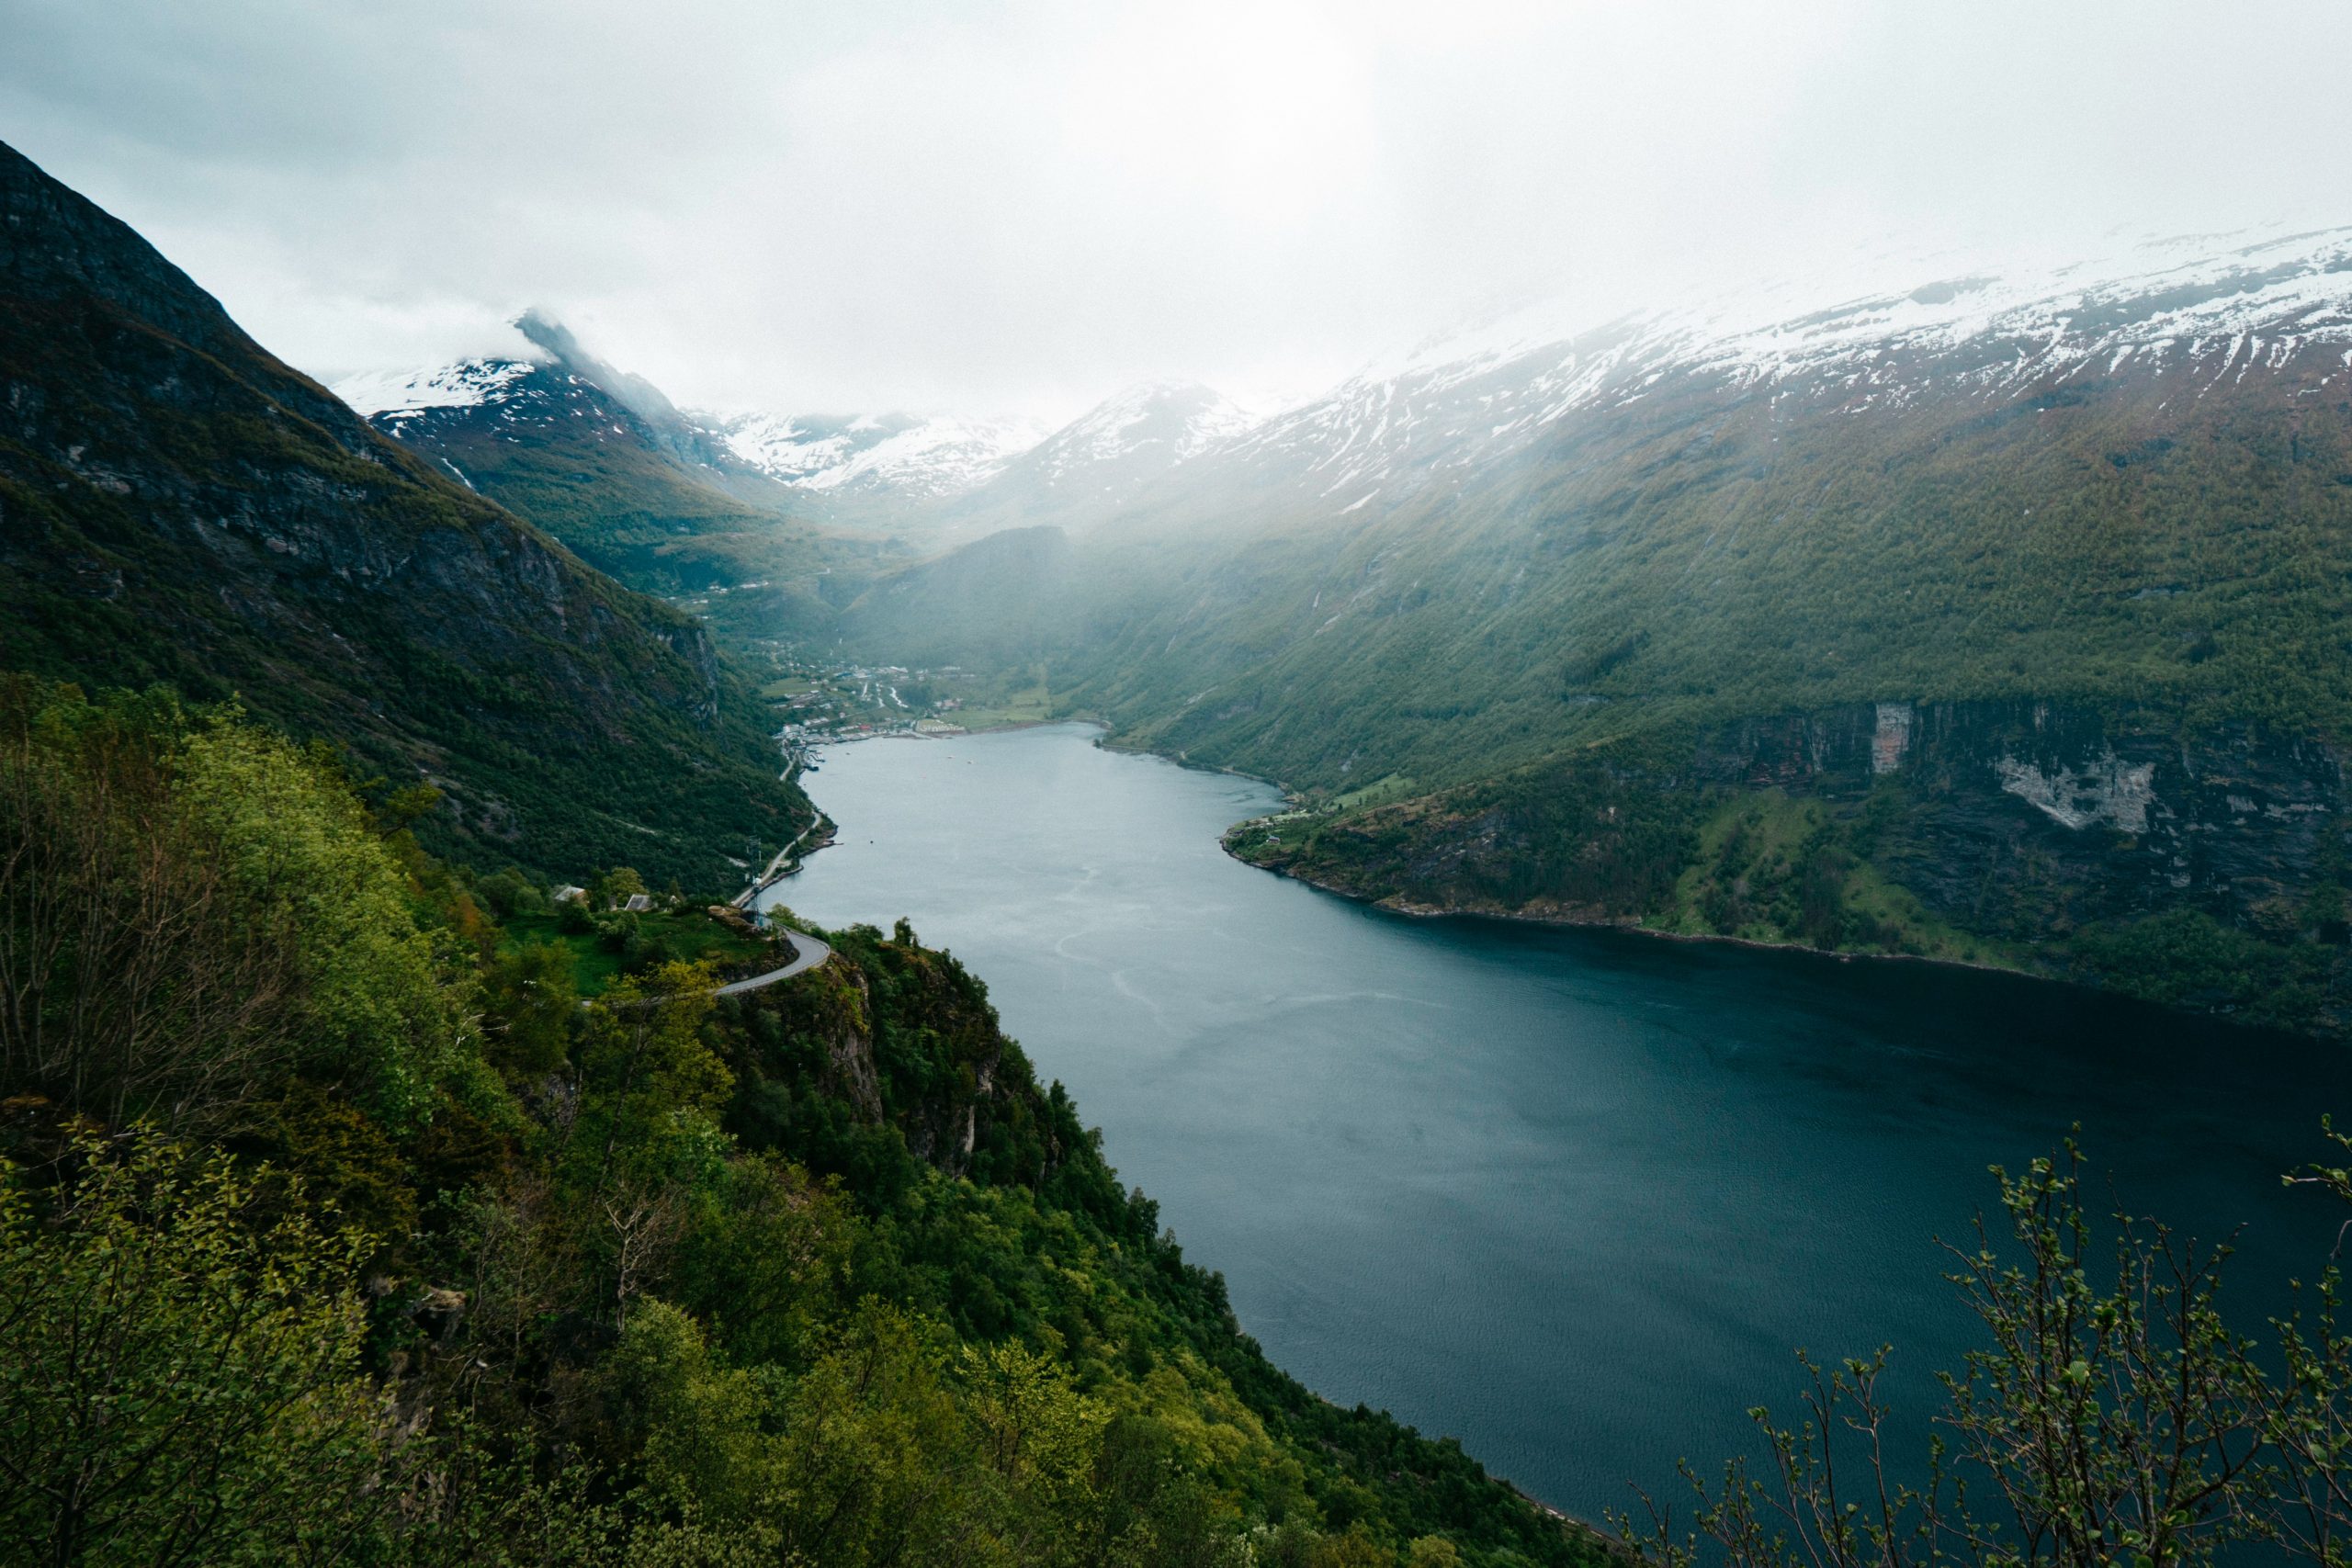 discover the breathtaking beauty of fjords - nature's magnificent creations waiting to be explored and admired.